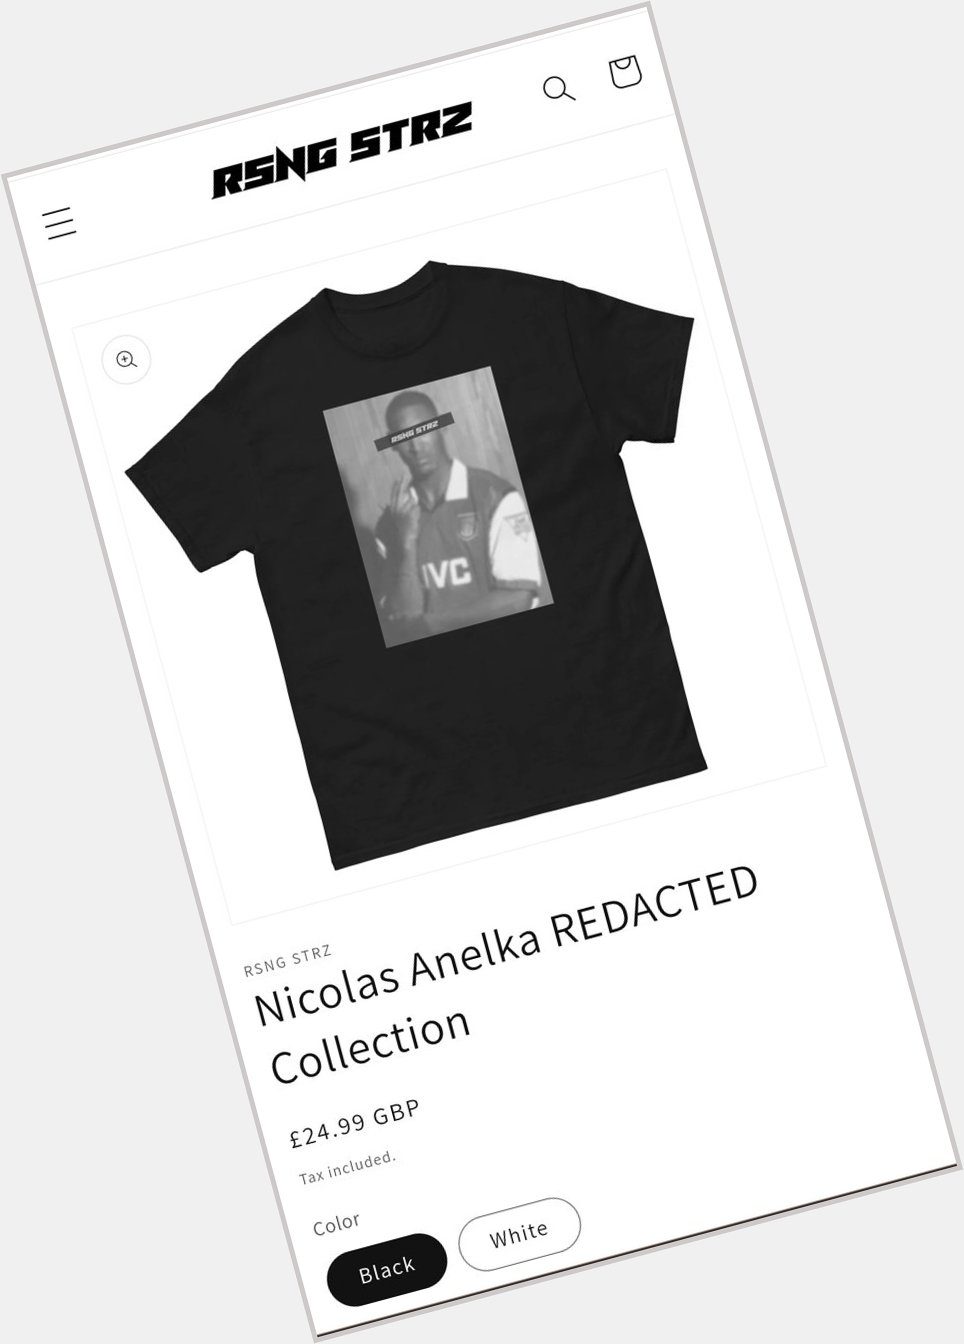 Happy birthday Nicolas Anelka!  Celebrate with a REDACTED Collection T, via this link;  